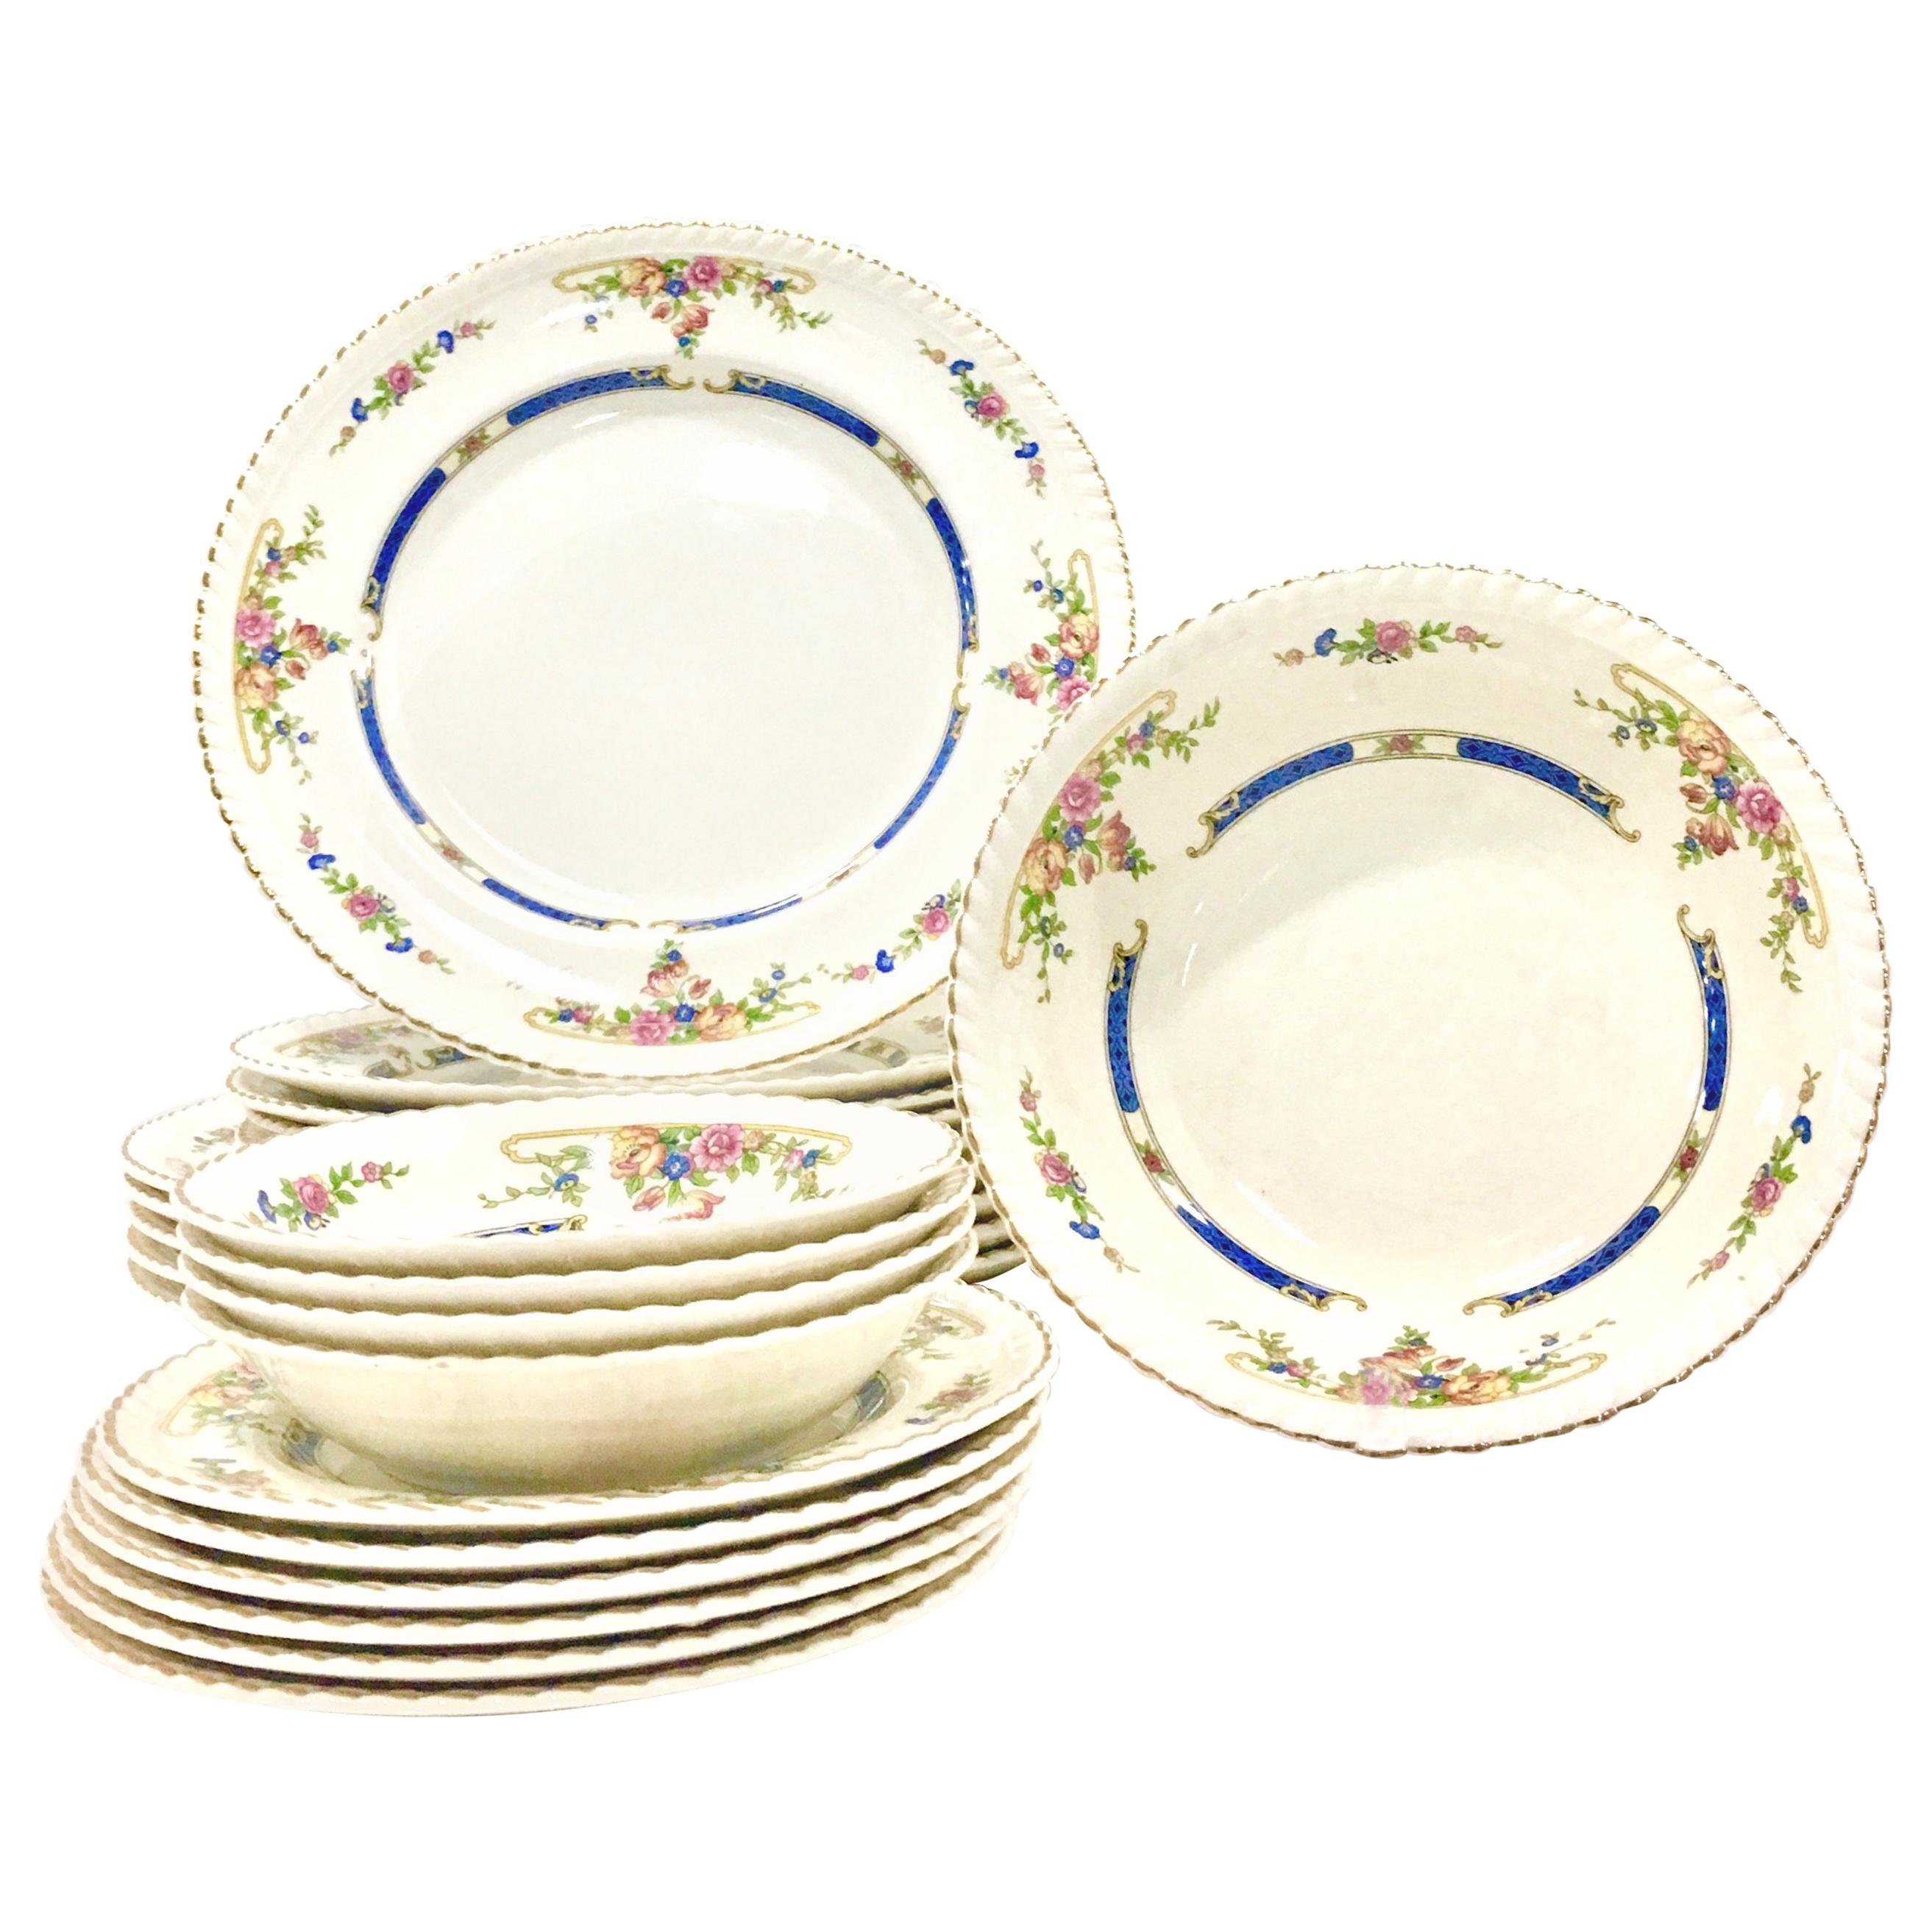 Antique English Porcelain Dinnerware "Eastbourne" by Johnson Brothers, Set/21